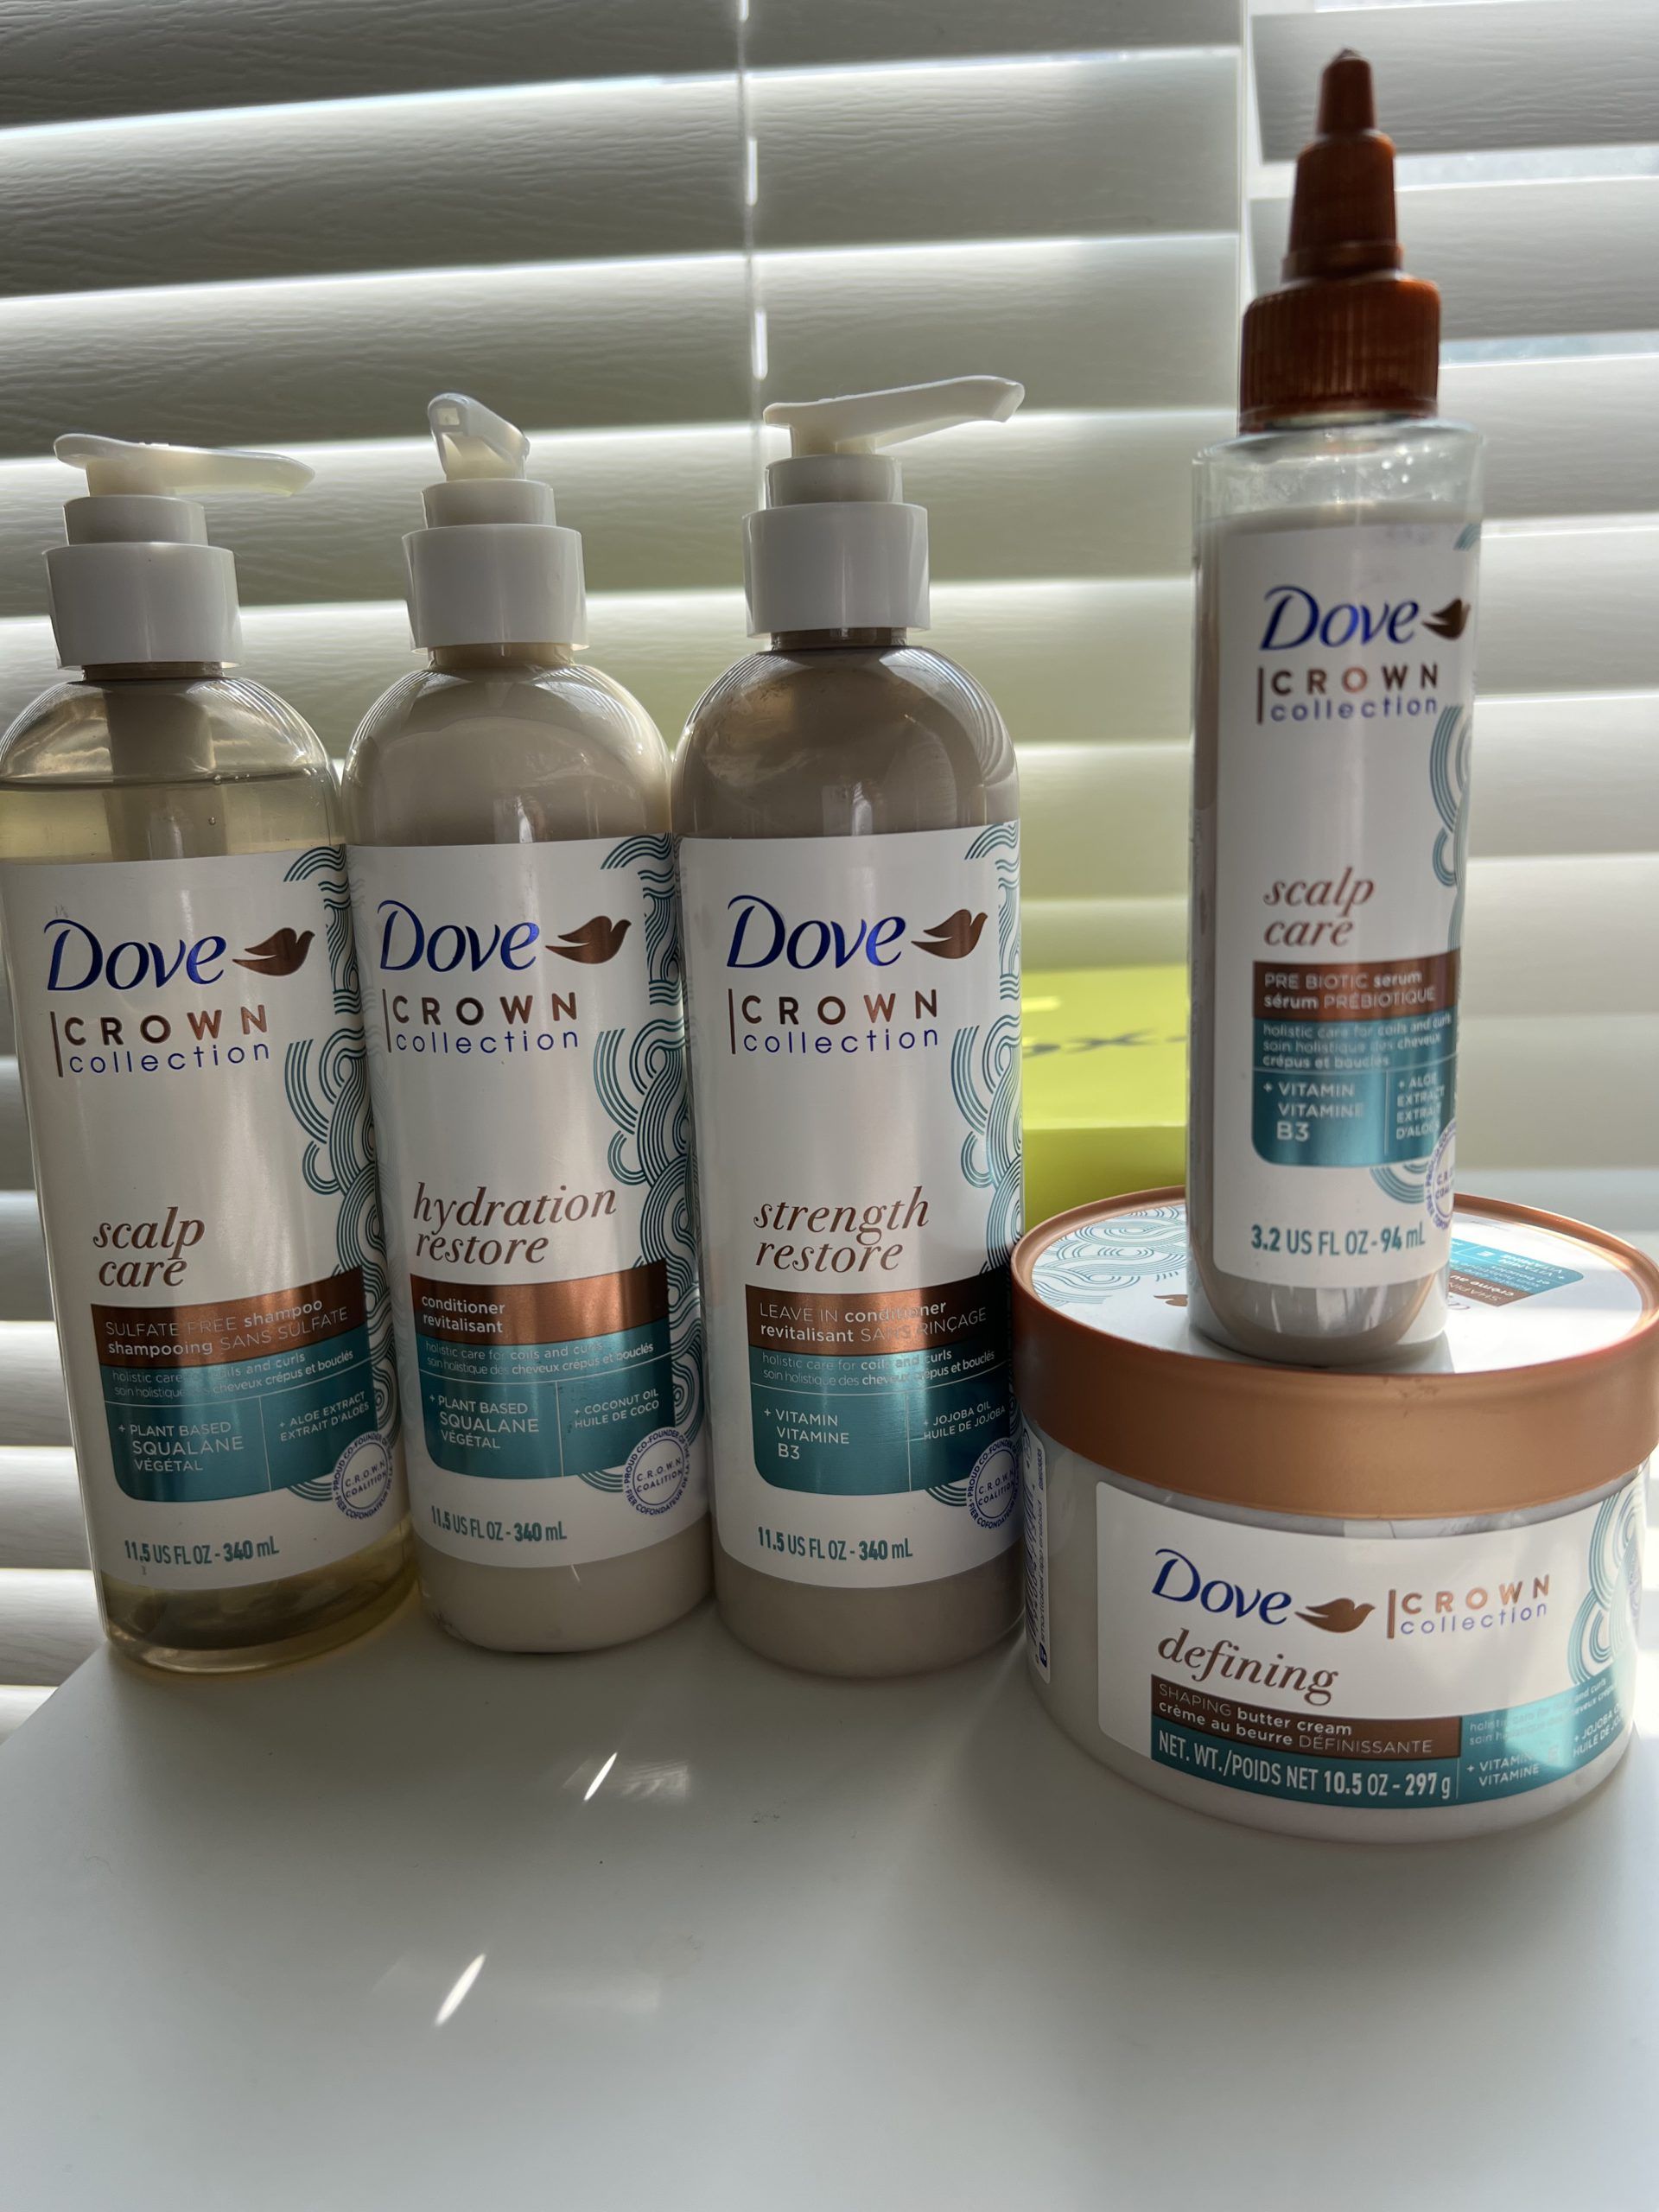 Dove Crown Collection